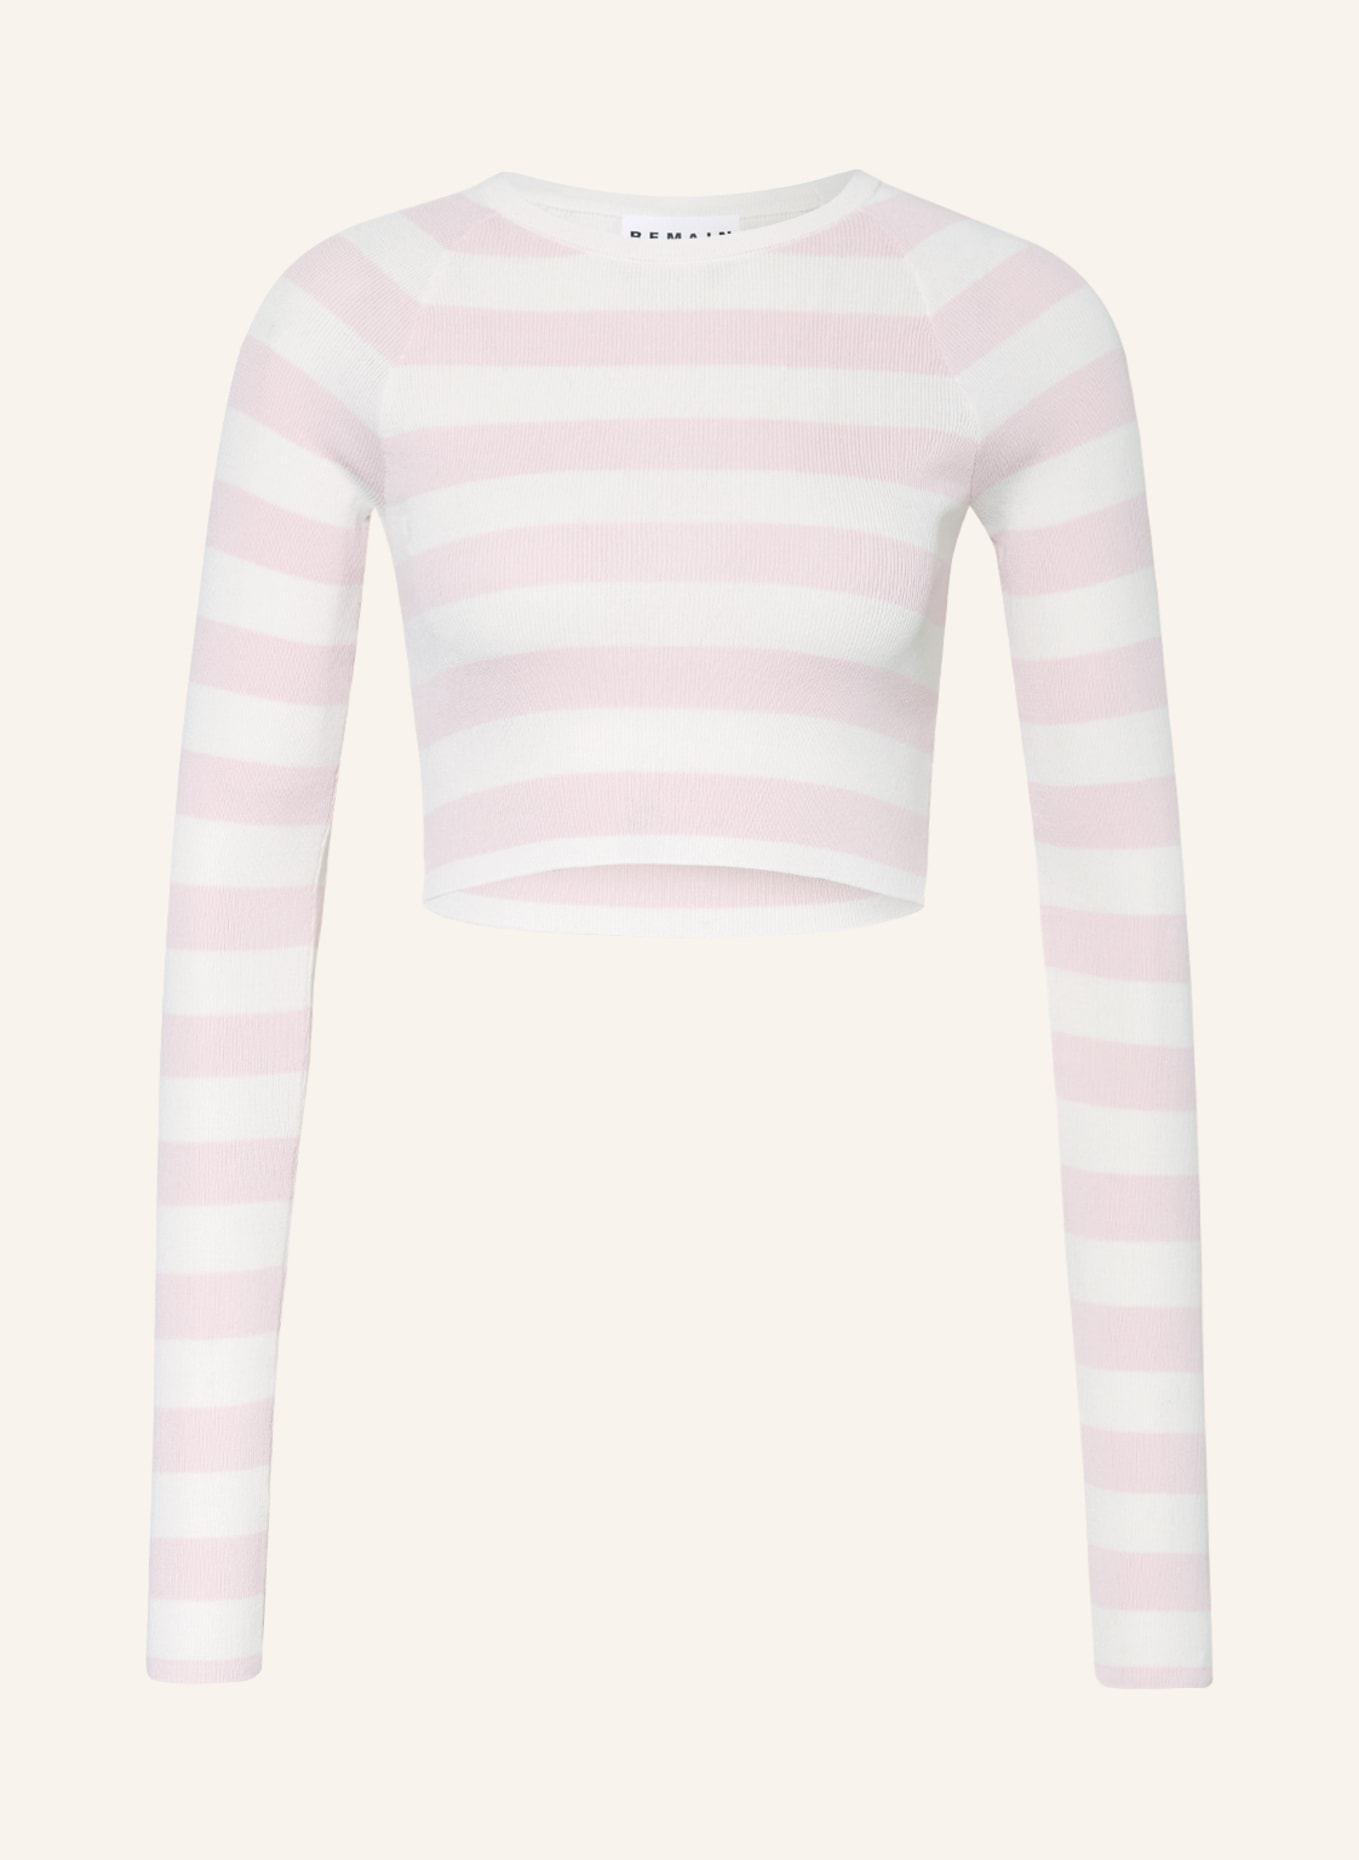 REMAIN Cropped-Pullover, Farbe: WEISS/ HELLROSA (Bild 1)